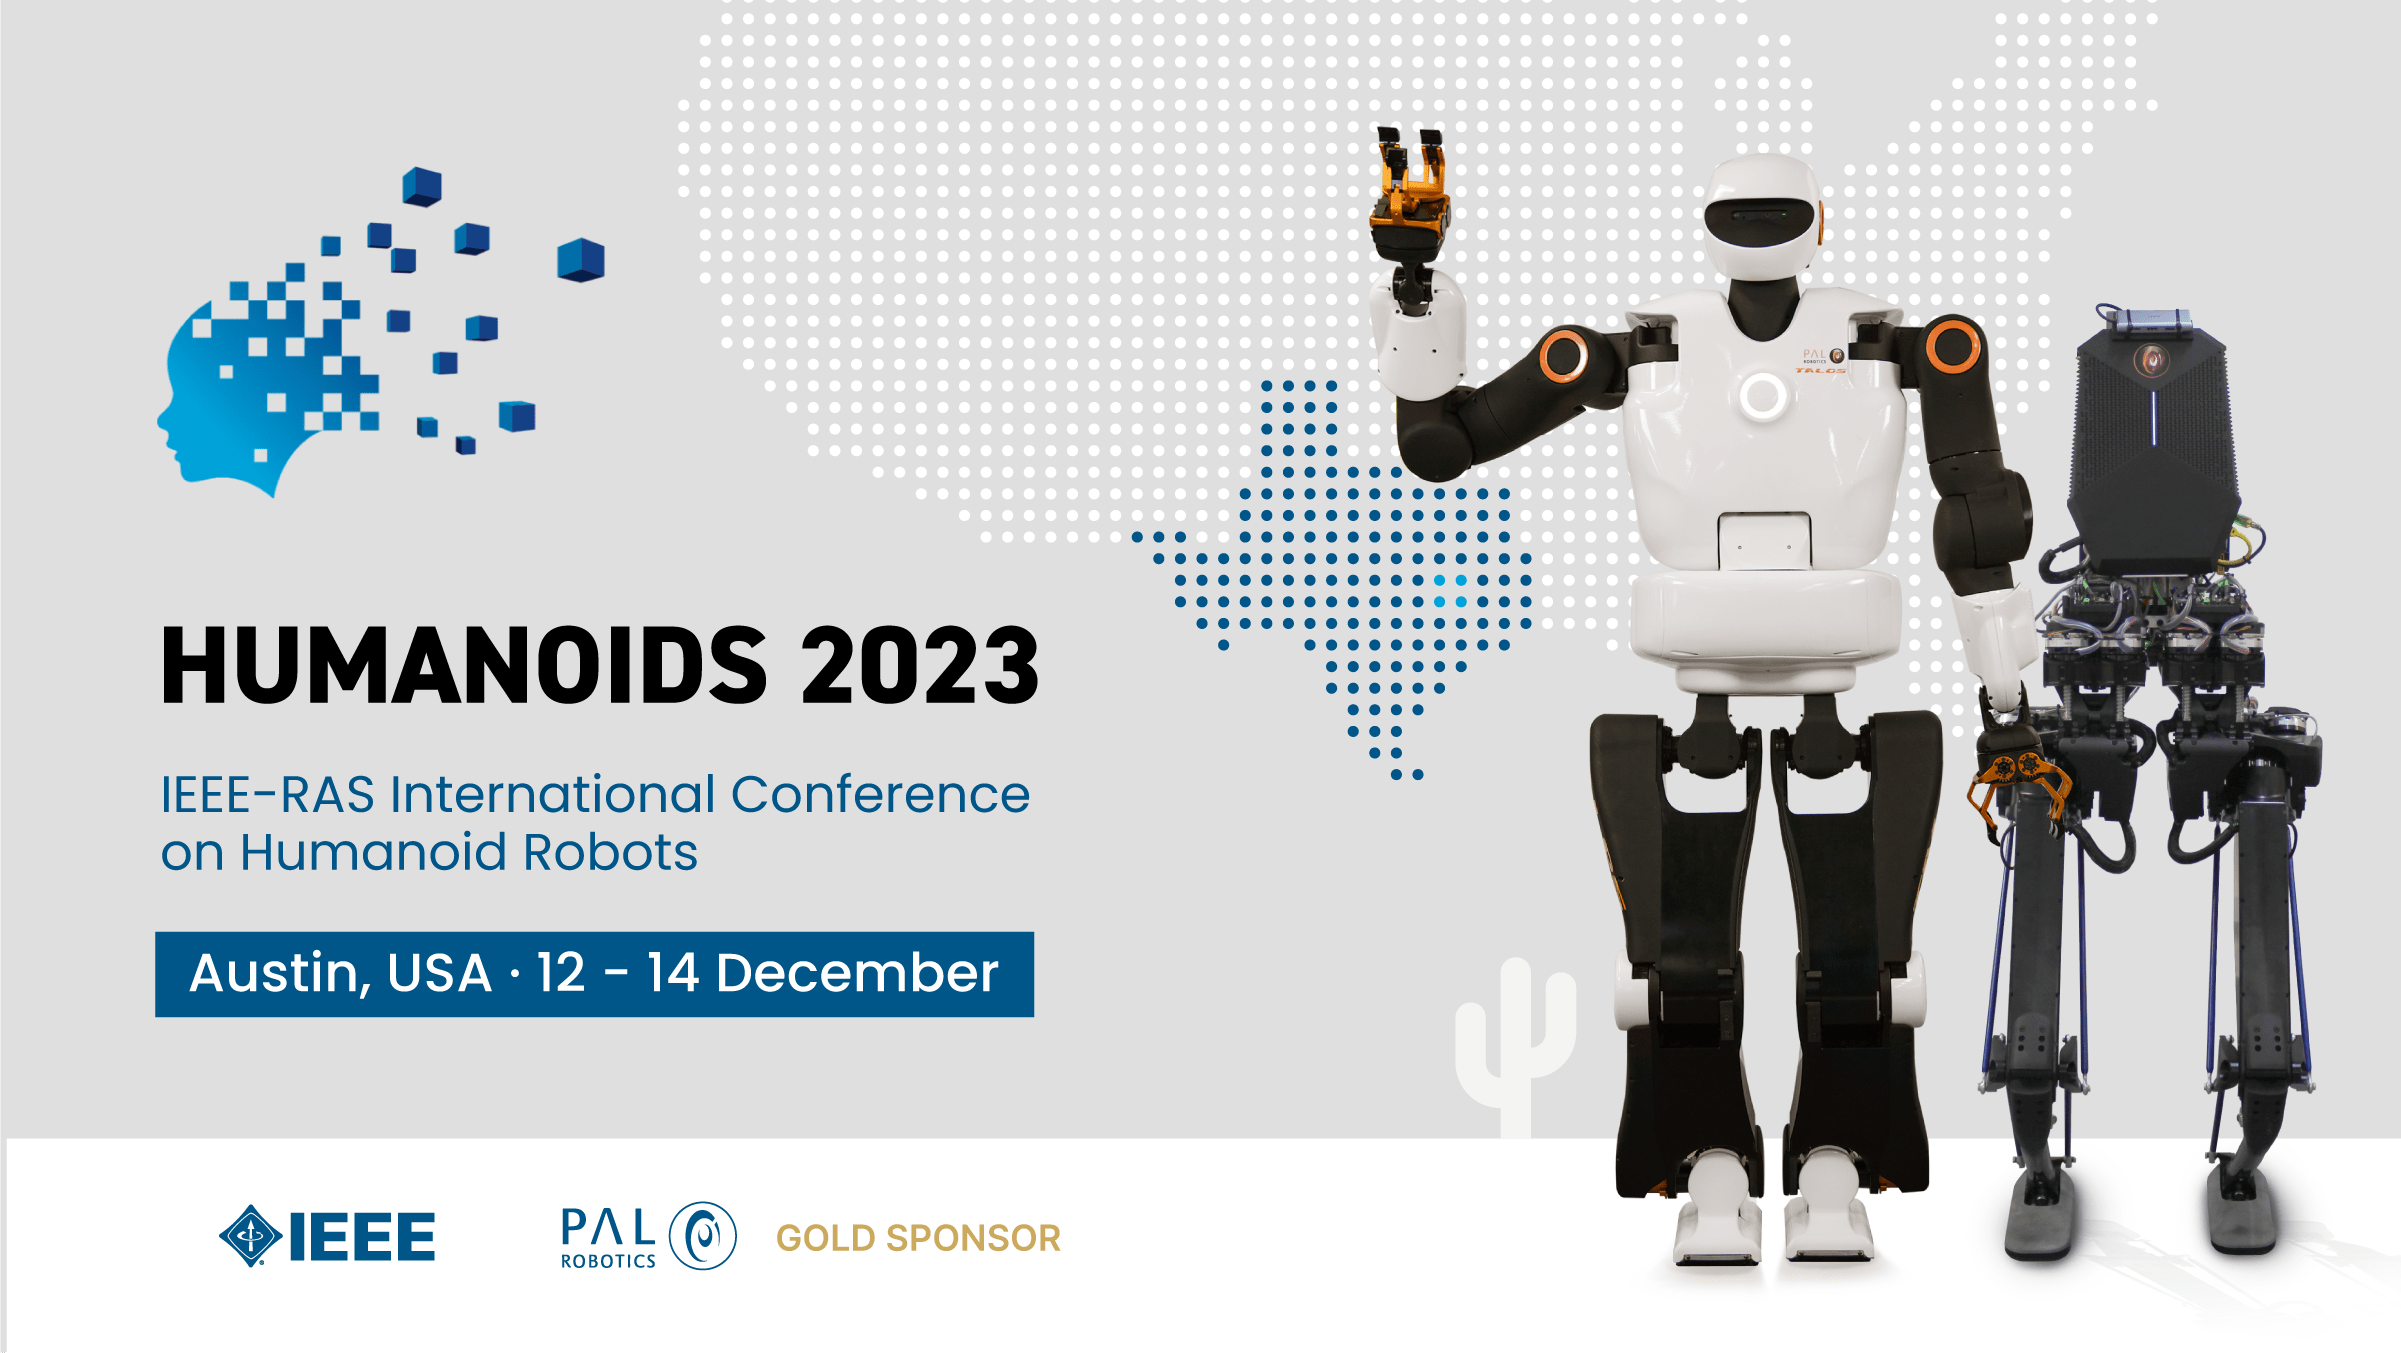 Humanoid robots TALOS and KANGAROO with information about attendance at the humanoids 2023 conference